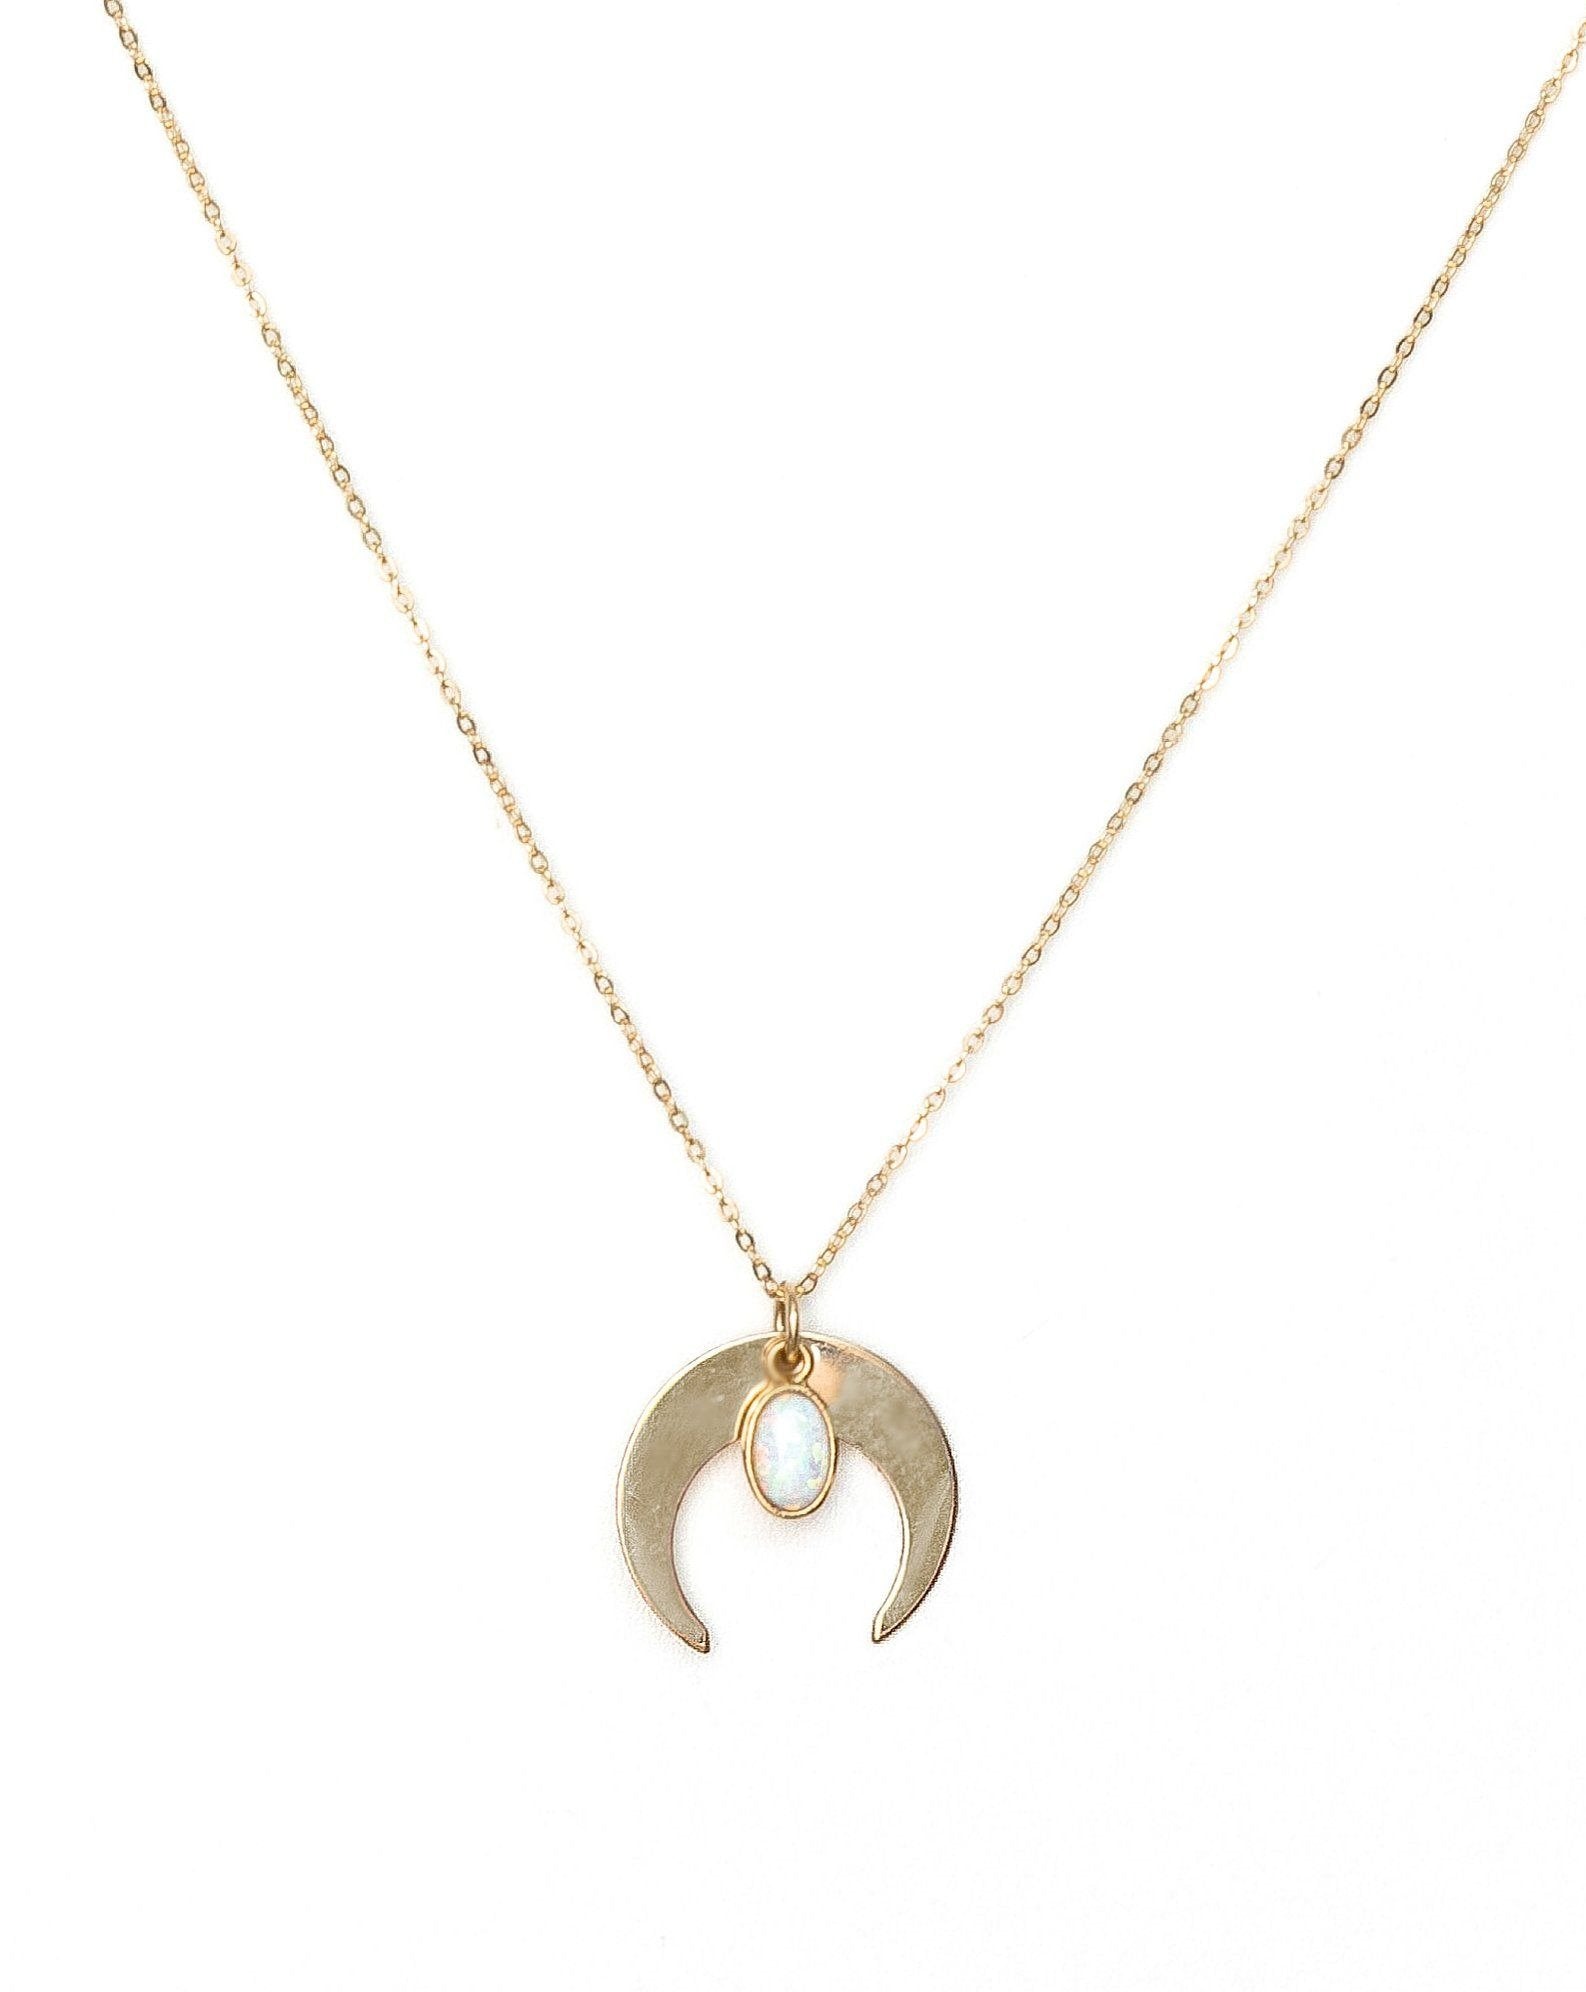 Opal Moon Necklace by KOZAKH. A 16 to 18 inch adjustable length necklace, crafted in 14K Gold Filled, featuring an oval Opal charm and a moon charm.